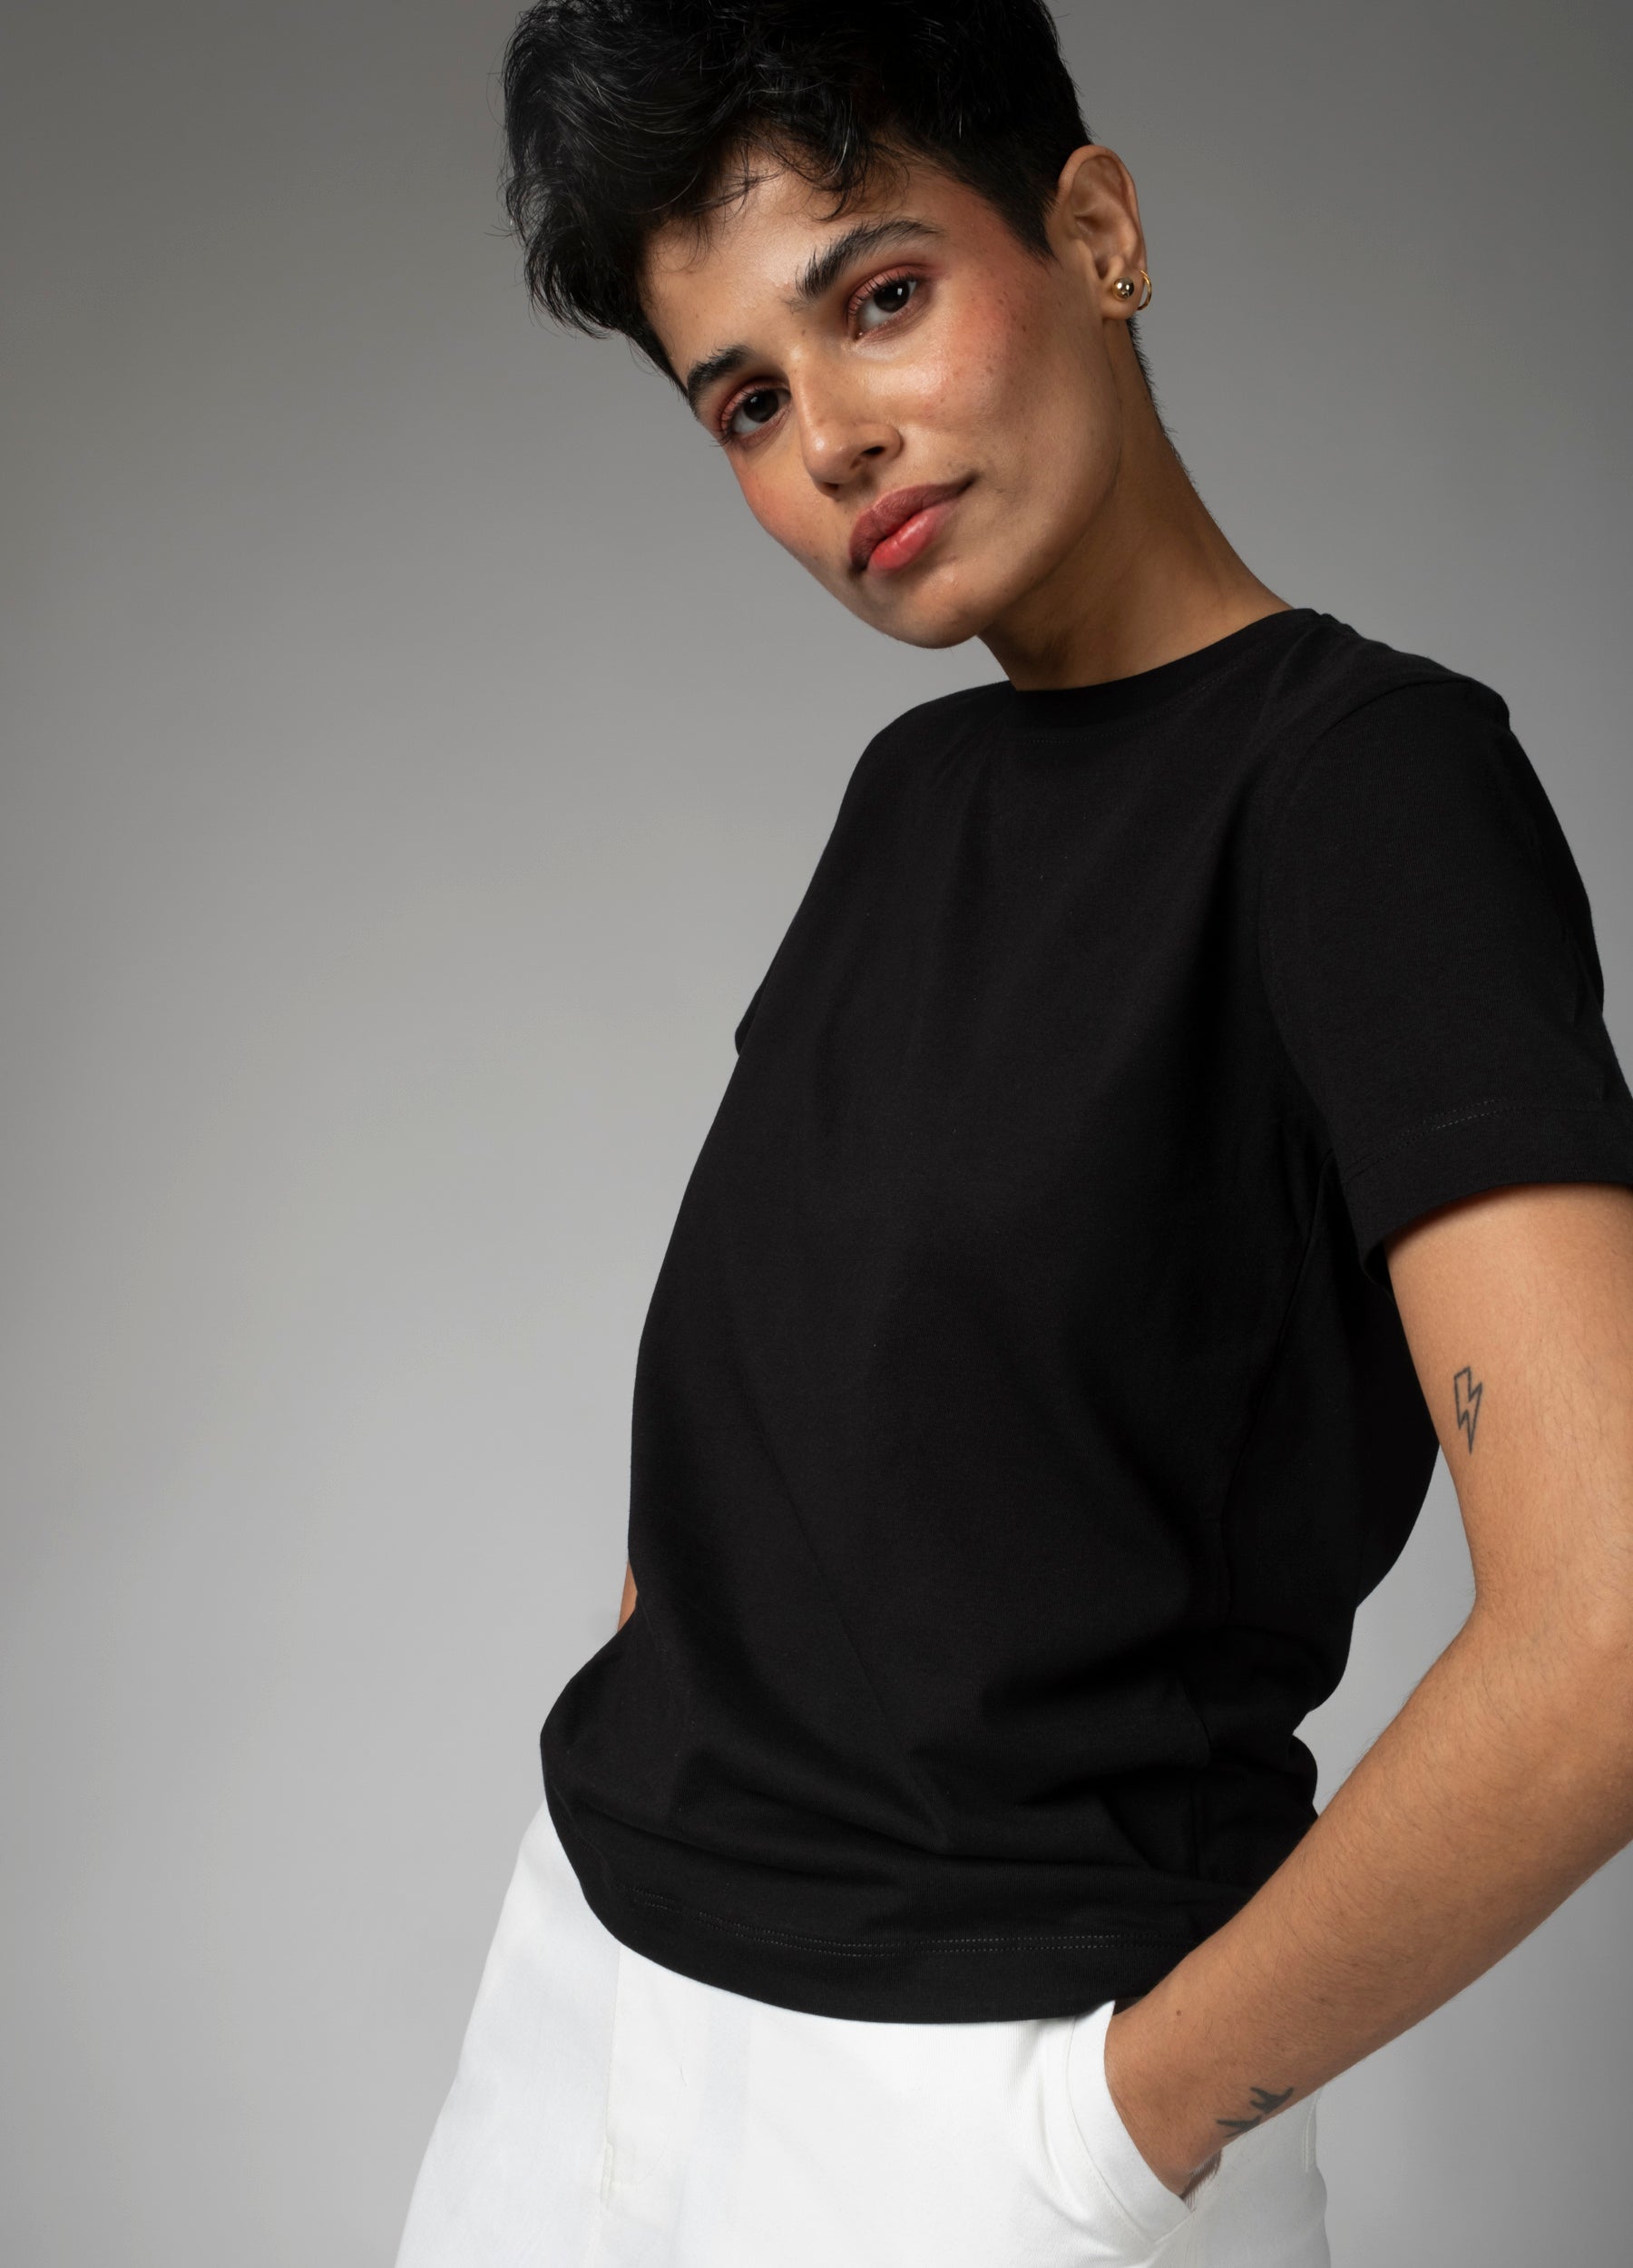 Organic Cotton Tops - Sustainable Clothing Made in India – No Nasties